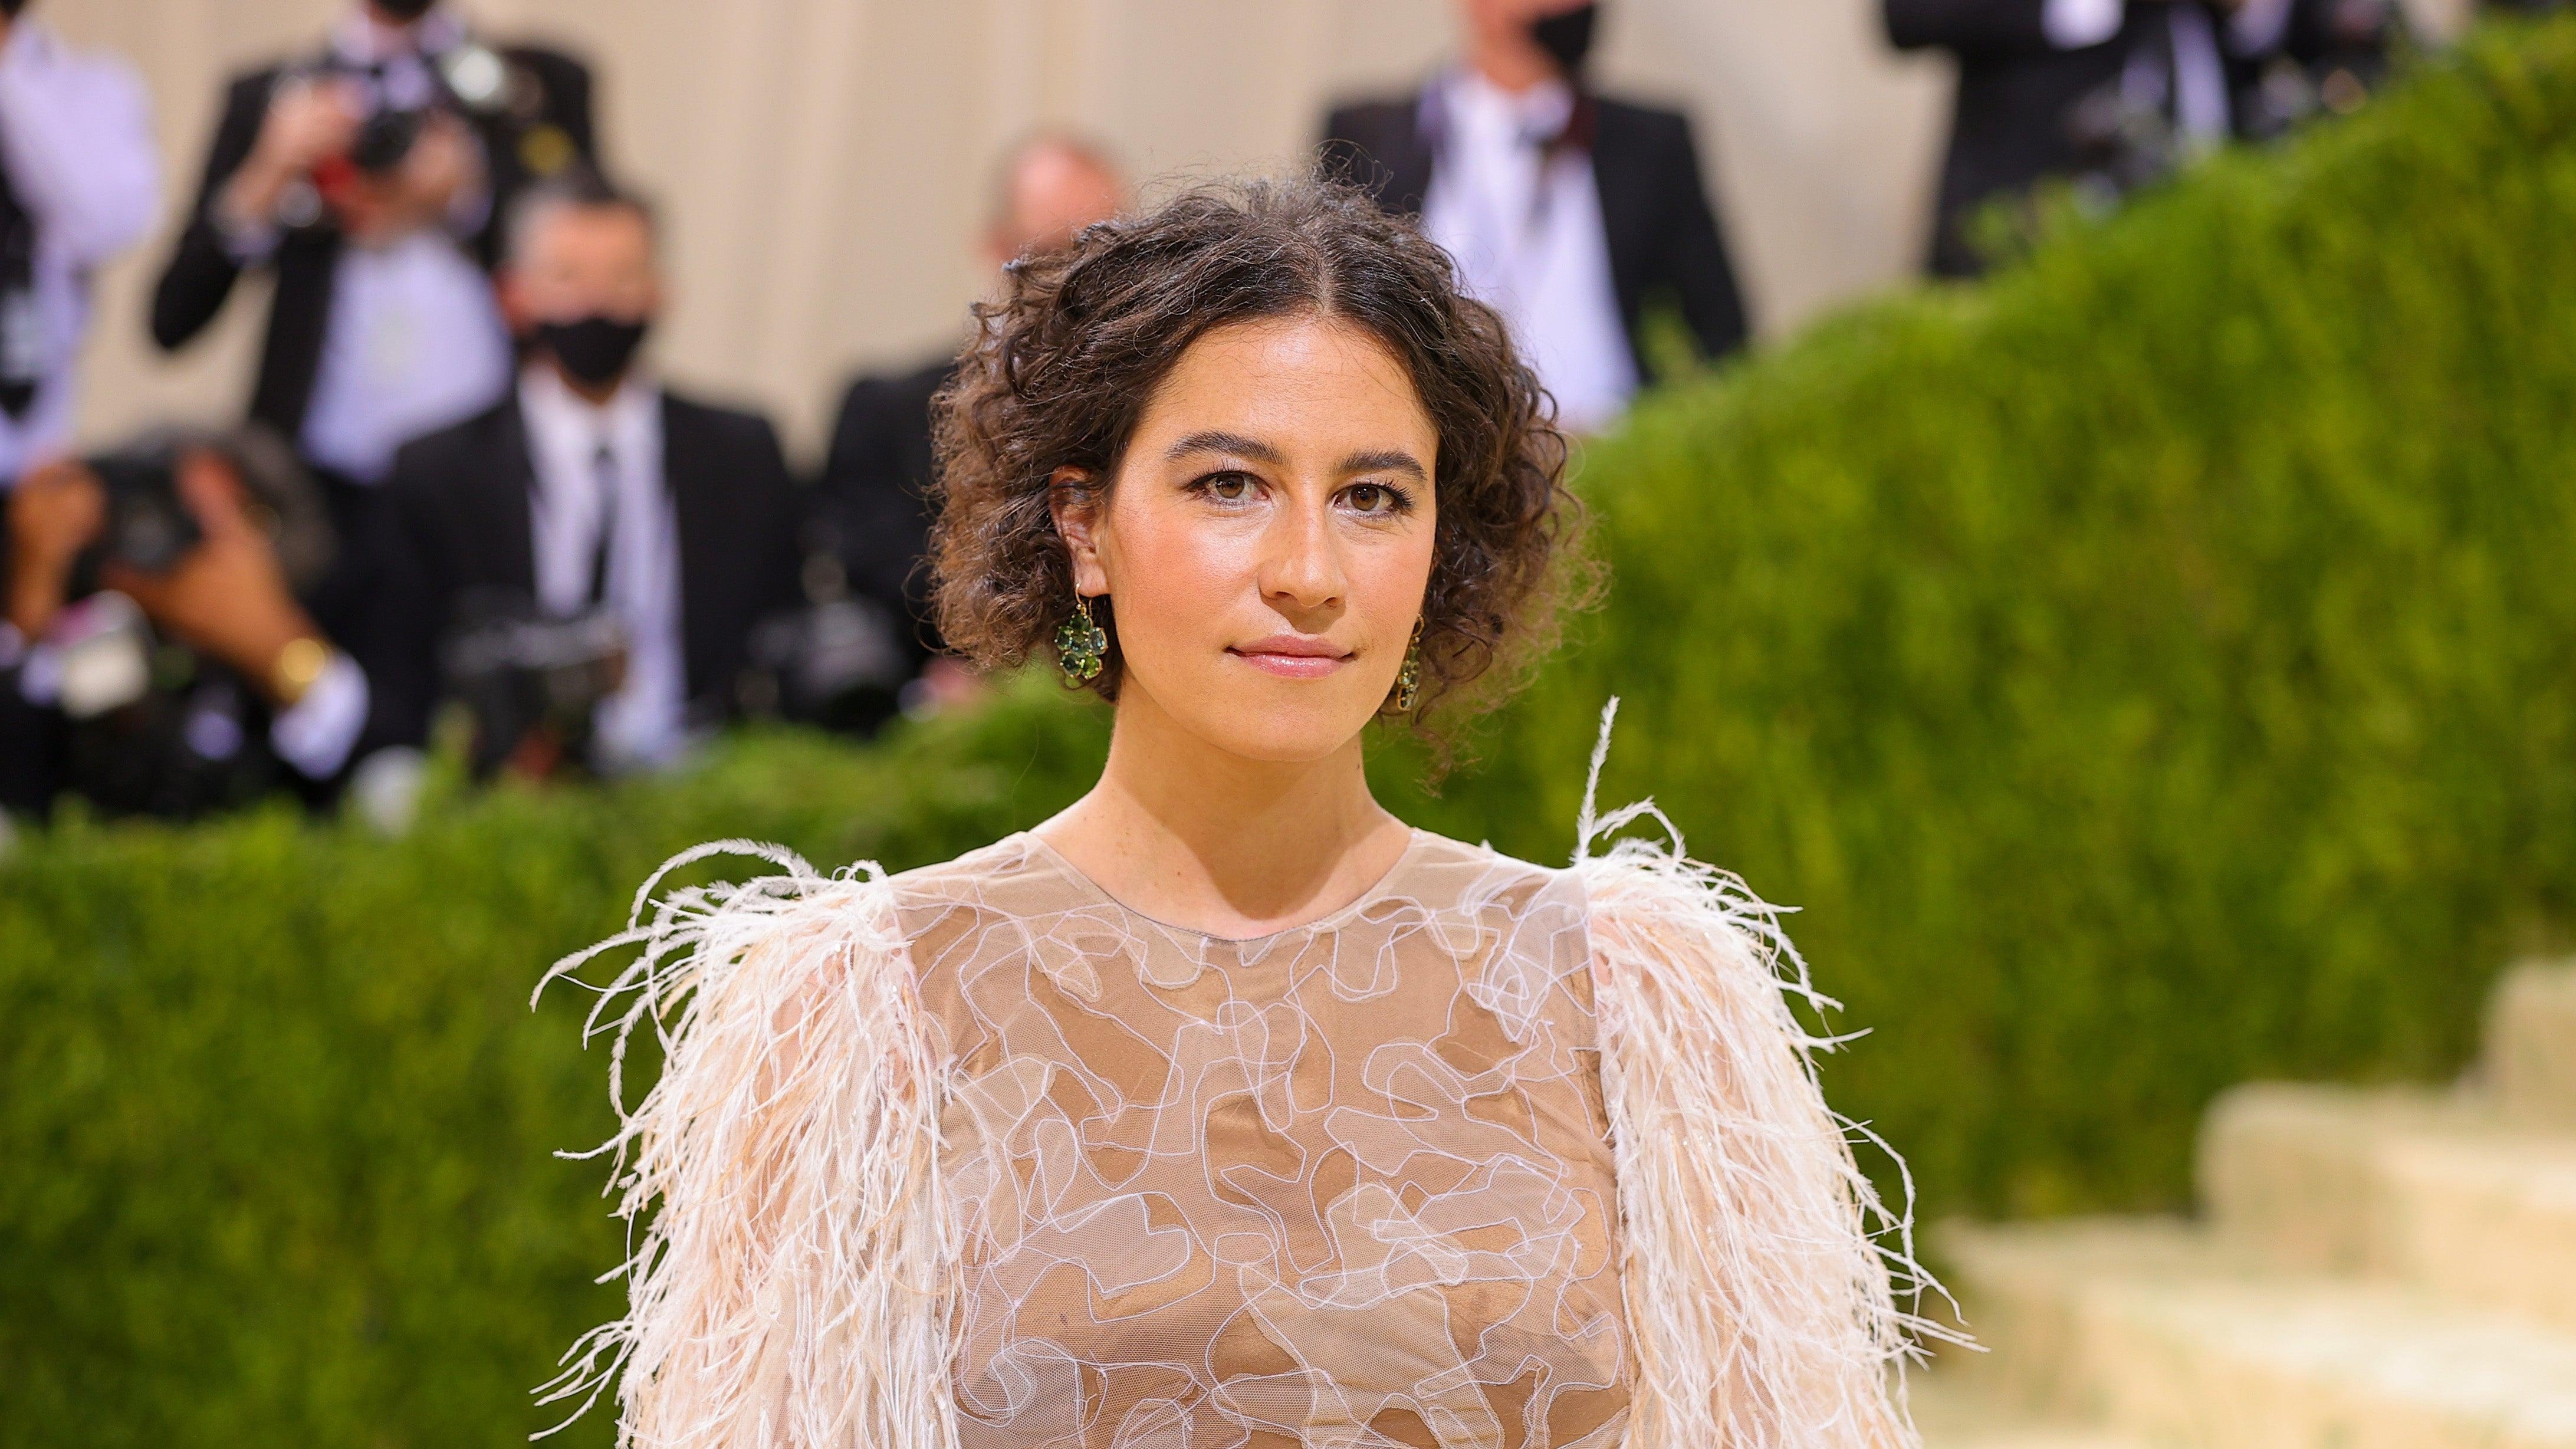 Ilana Glazer potentially starring in apocalyptic comedy series The Suck